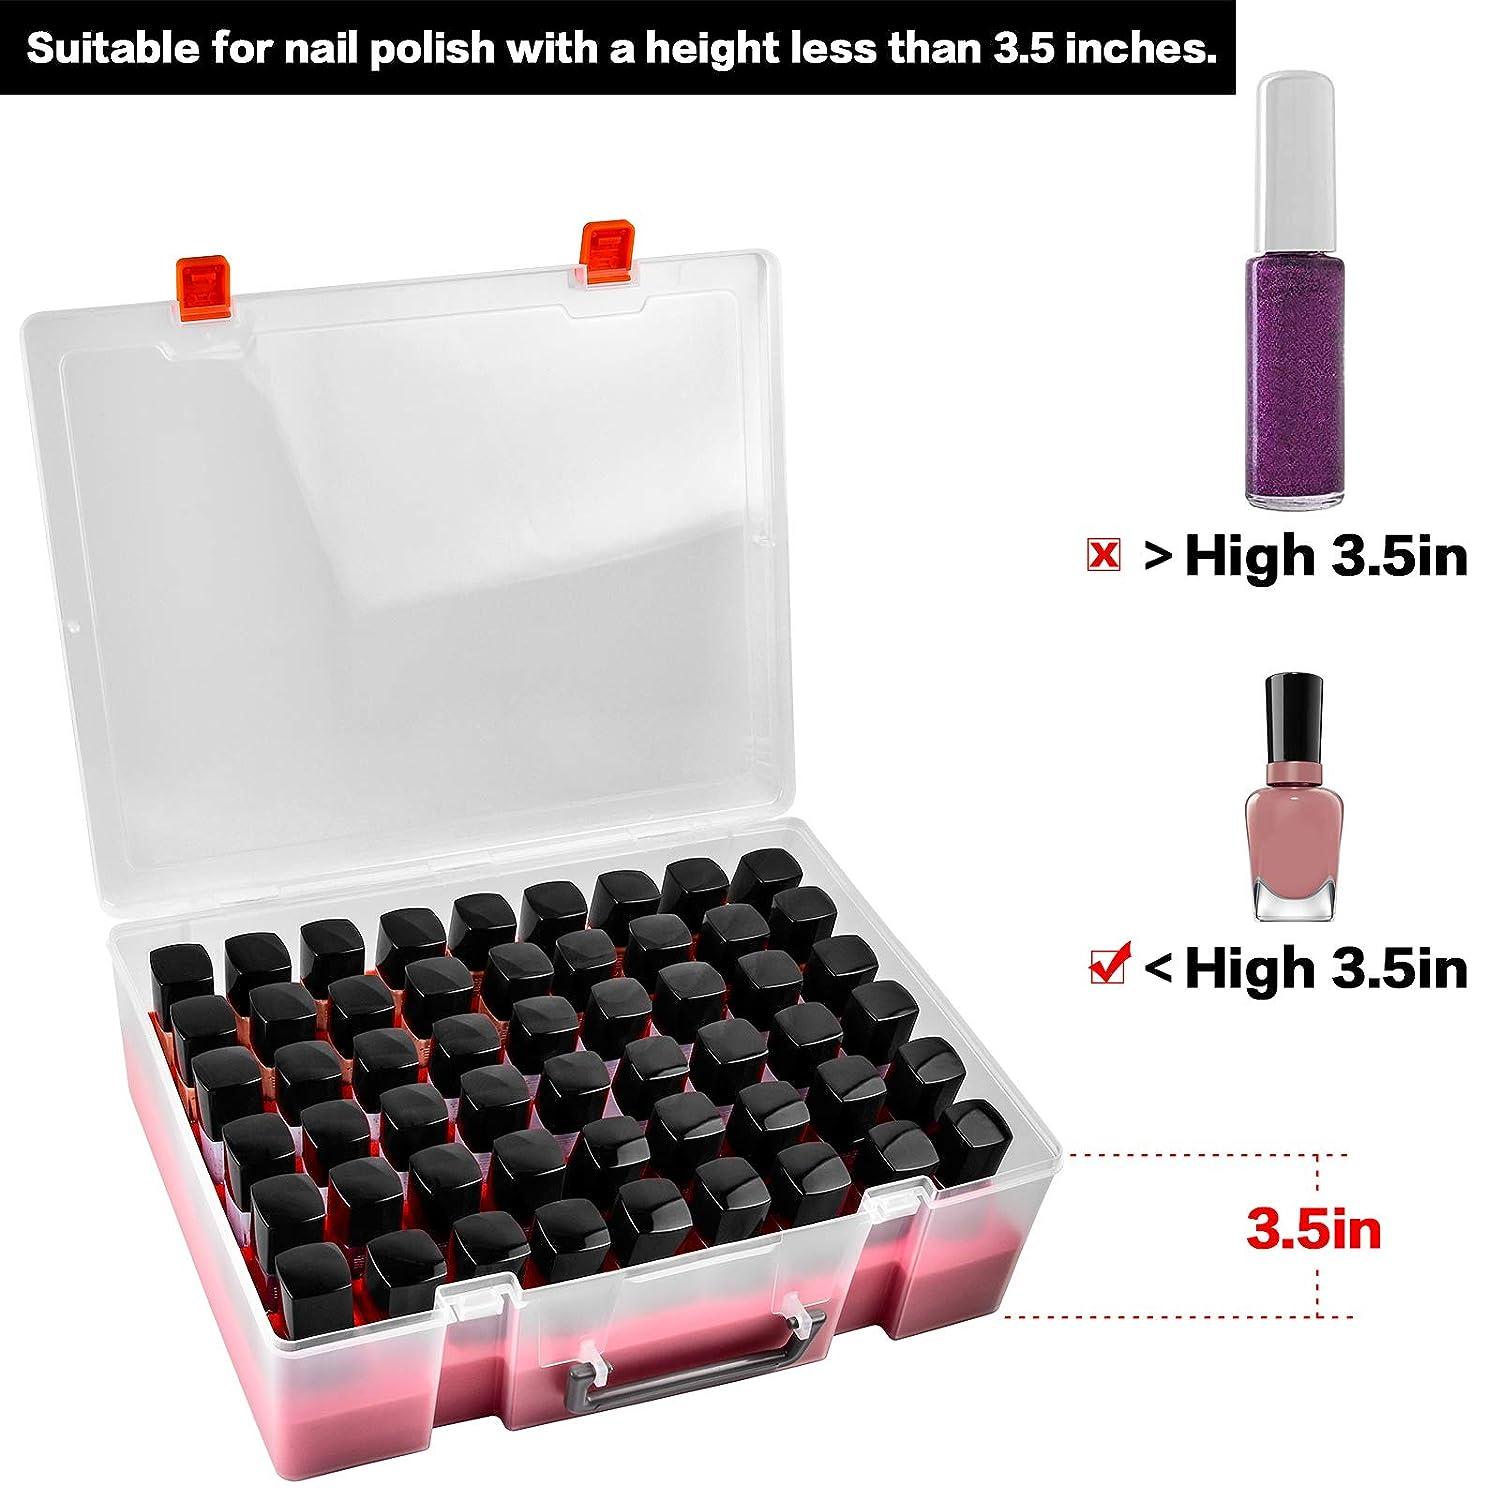 Buy Universal Nail Polish Holder & Organizer Contains 54 Bottles for  Gellen, Beetles, Sally Hansen, OPI, Essie and Other Fingernail Polish by  ALCYON (ONLY A CASE). Online at Low Prices in India -